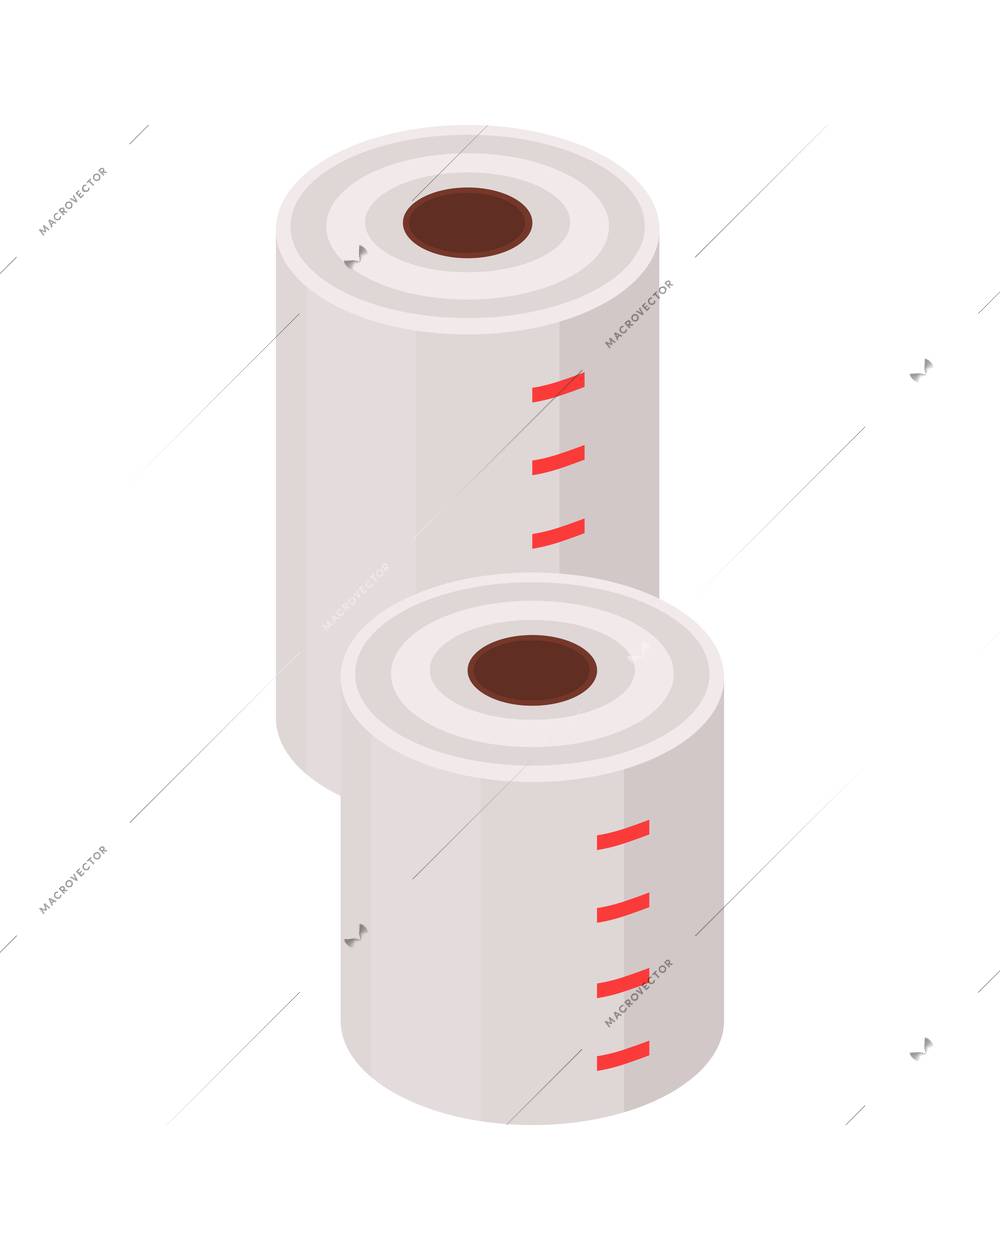 Isometric paper factory production composition with isolated image of two huge paper rolls vector illustration